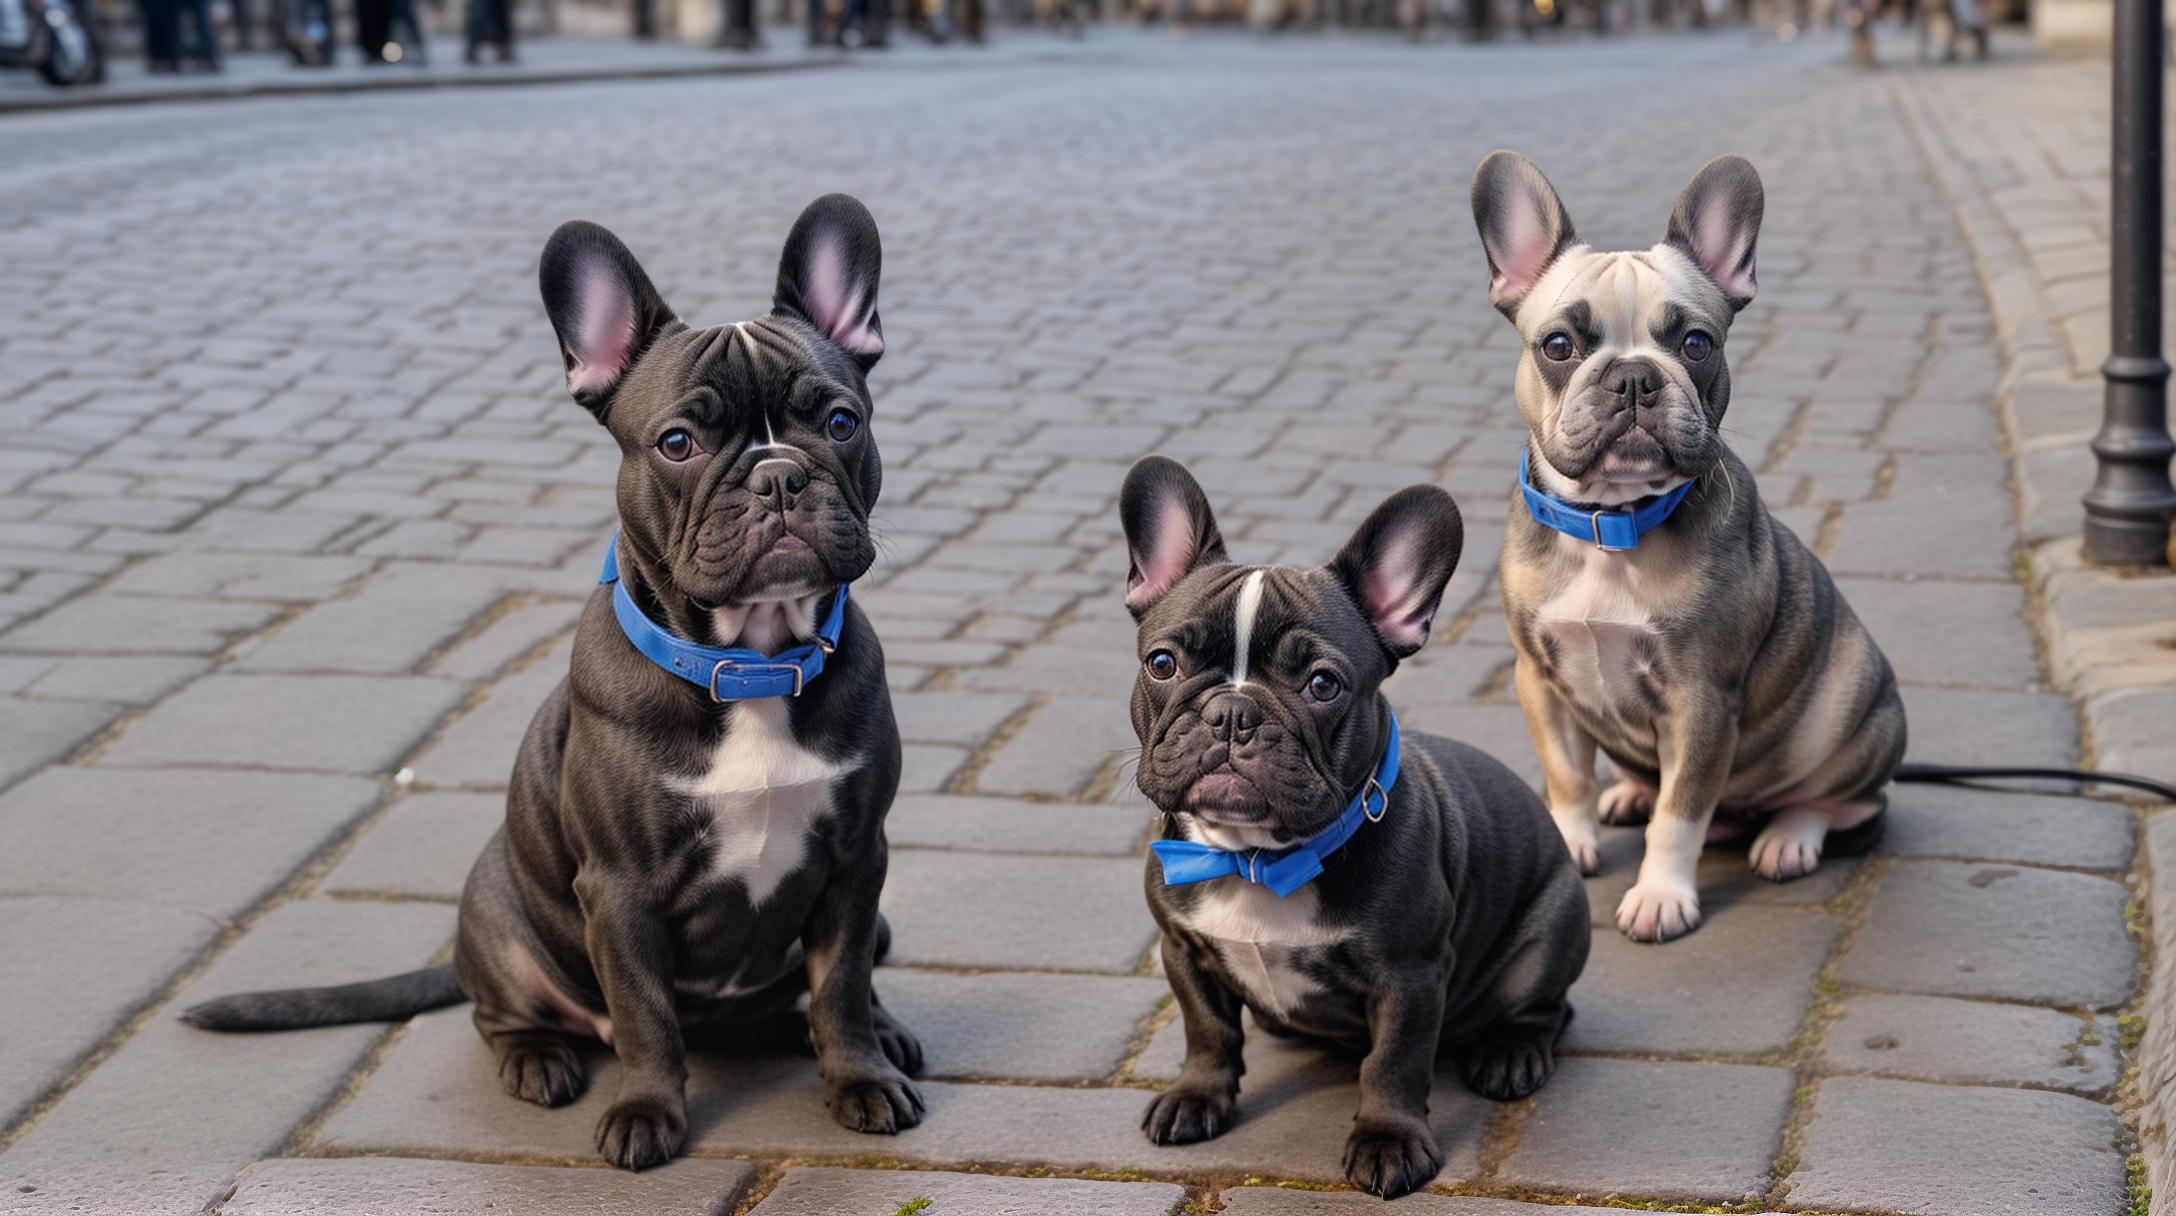  Create a realistic image of a French Bulldog in an urban setting. The dog is a compact adult with a smooth, brindle coat and the distinctive bat like ears characteristic of the breed. It is sitting confidently on a cobblestone street in a quaint city neighborhood, with small cafes and boutiques lining the sidewalks. Nearby, a classic street lamp casts a soft light, enhancing the twilight ambiance. The French Bulldog is wearing a stylish, bright blue collar, looking up with an alert and curious expression, embodying the charming and adaptable nature of the breed.